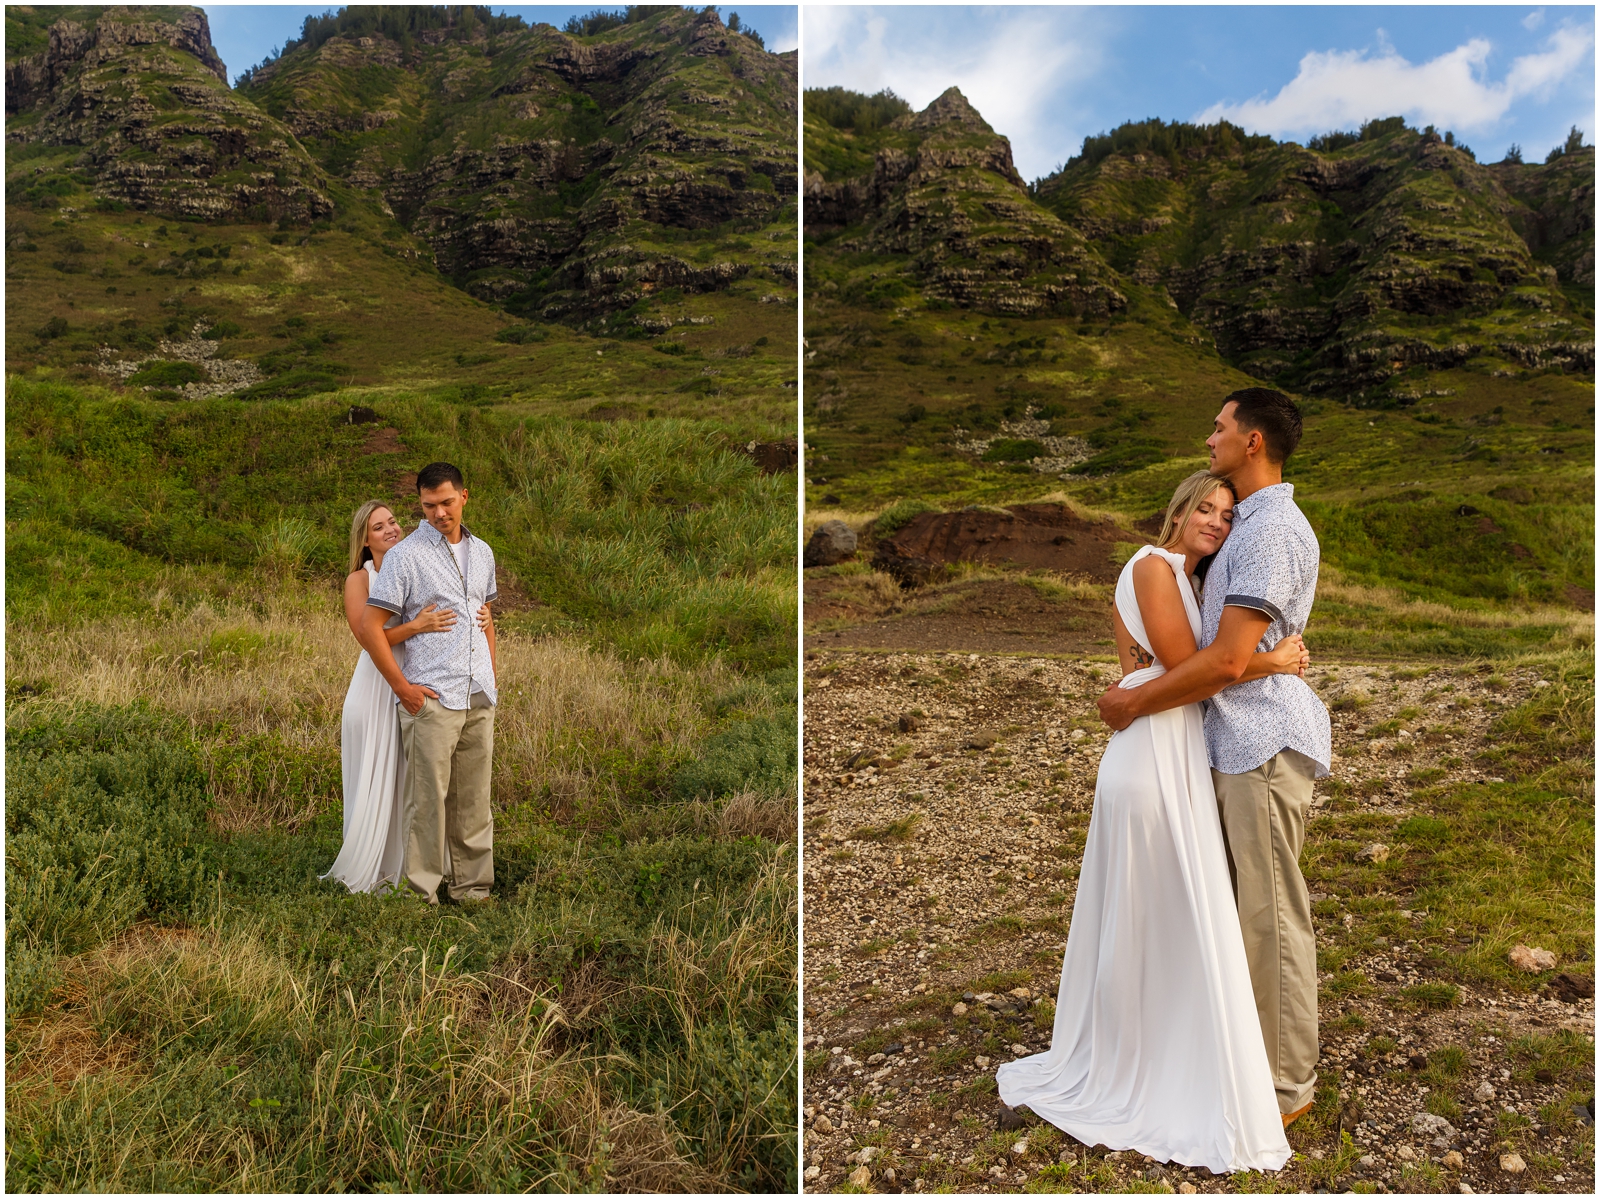 This couple hiked to their wedding venue on Oahu's North Shore.